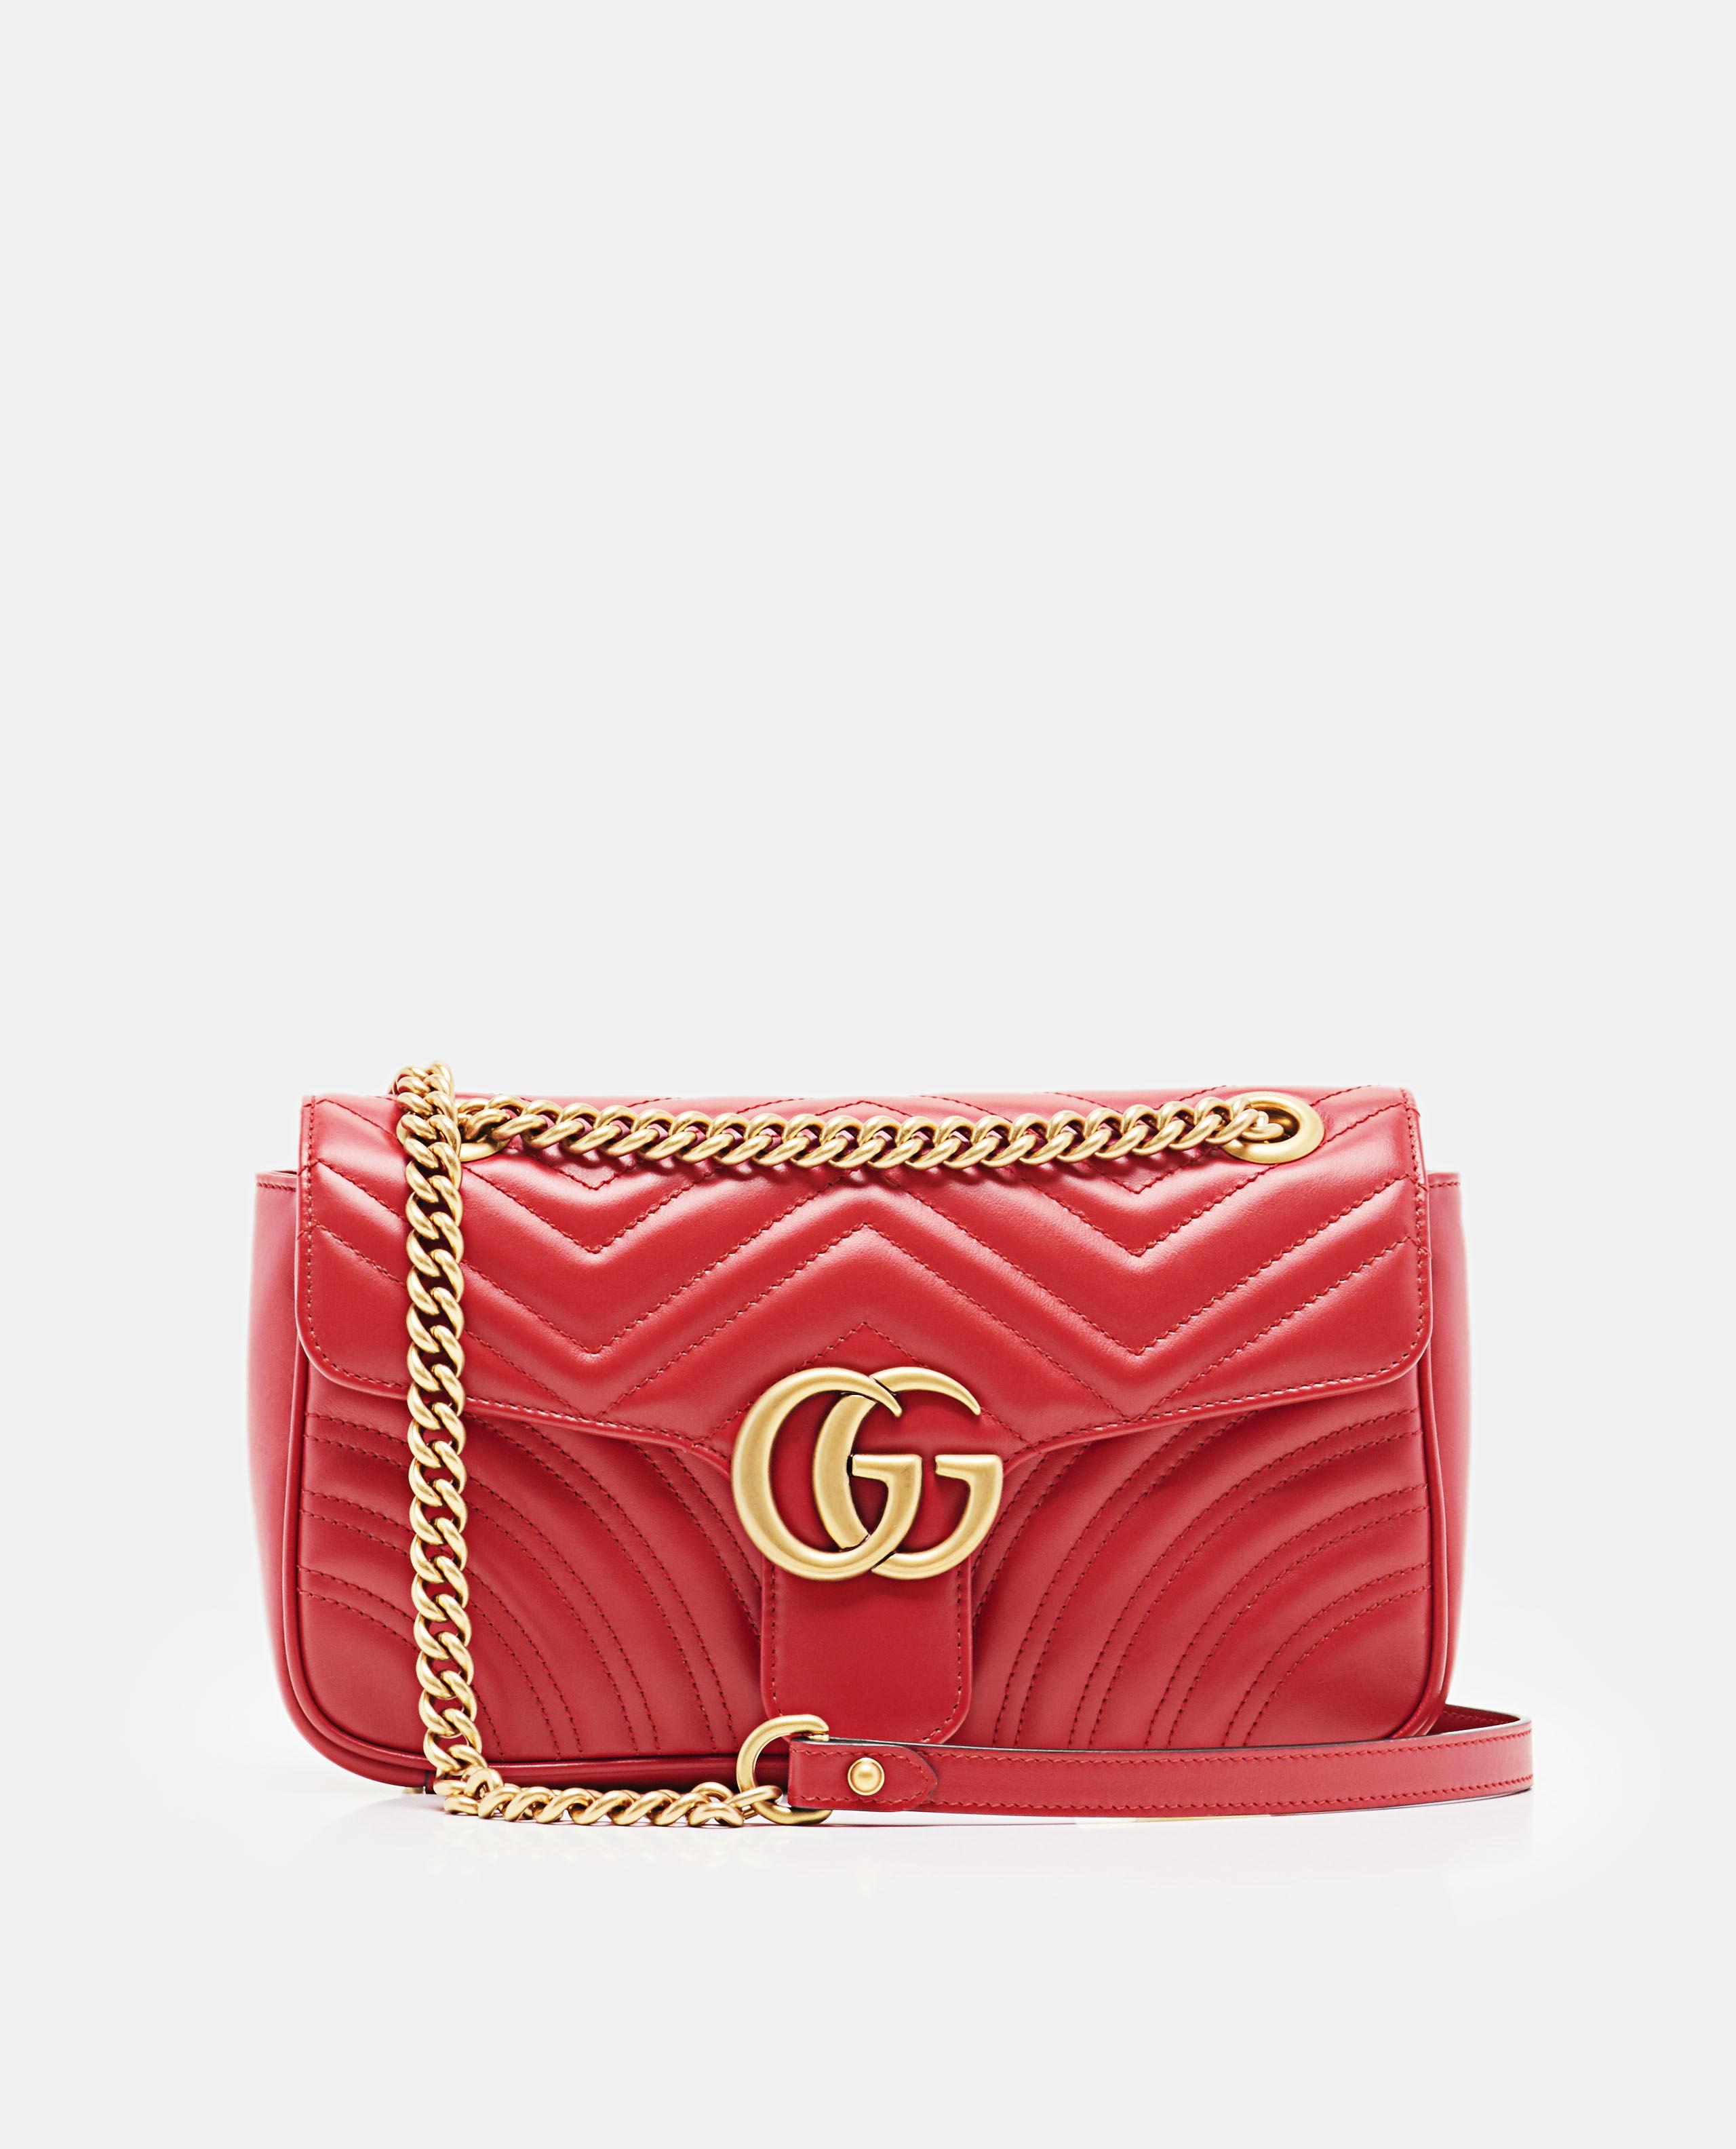 Gucci Gg Marmont Small Matelass Shoulder Bag in Red - Lyst